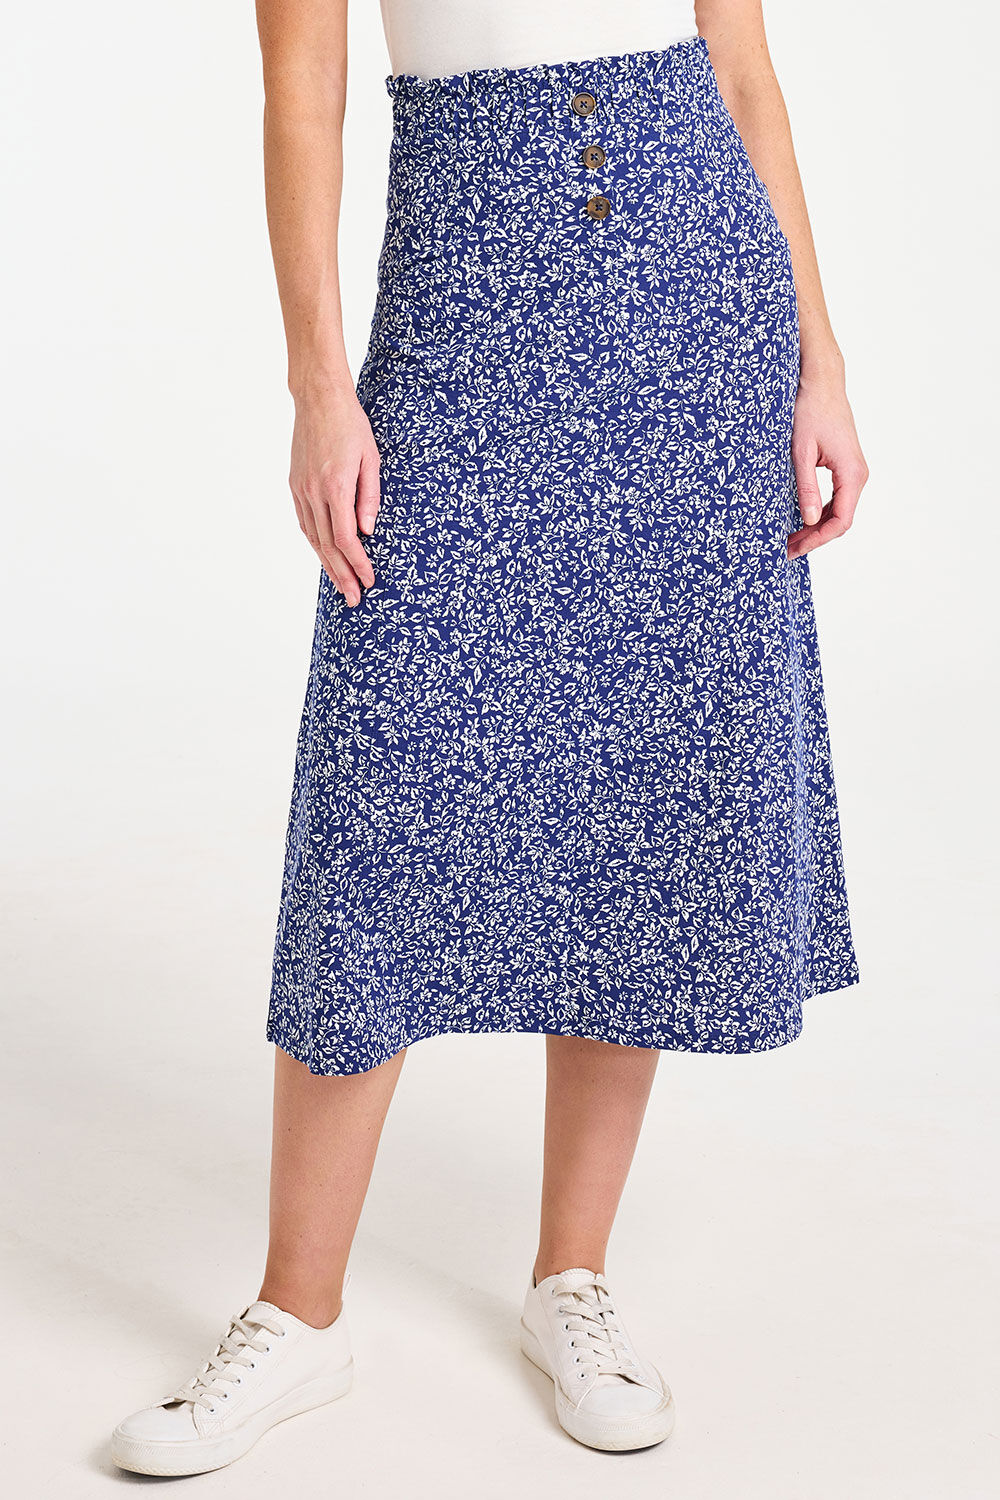 Bonmarche Navy Ditsy Print A-Line Elasticated Jersey Skirt With Pocket Detail, Size: 16